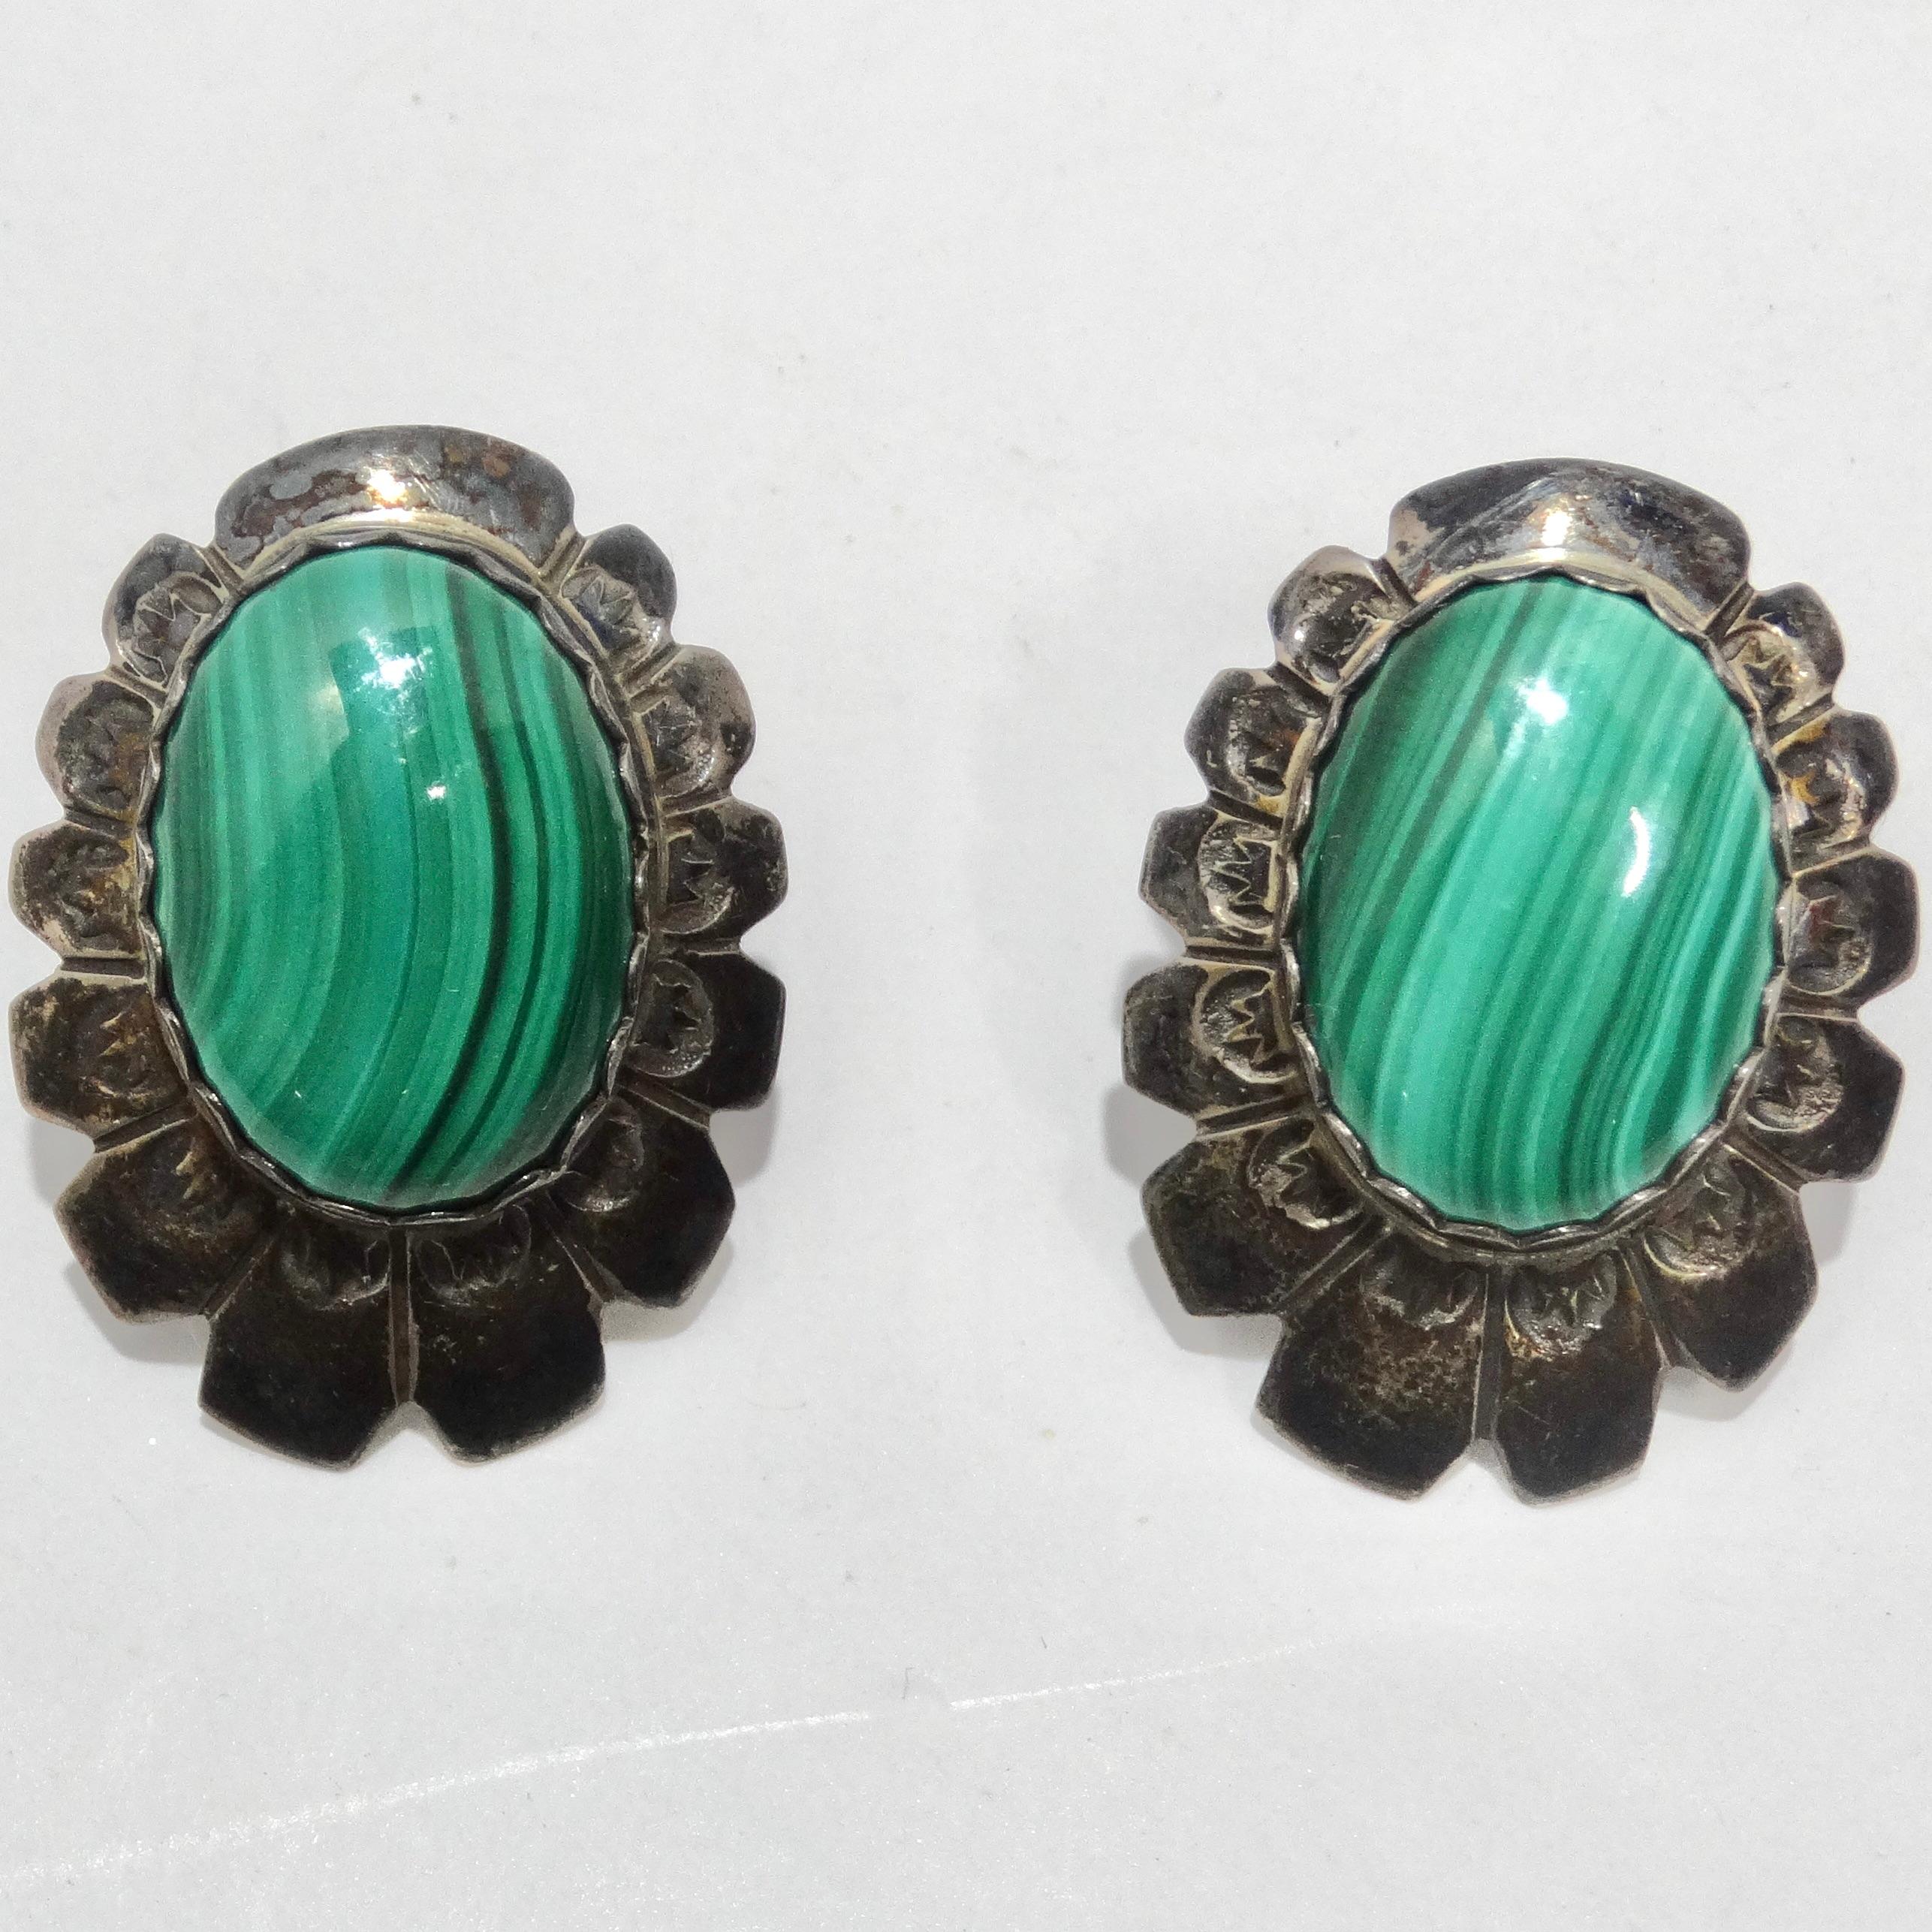 1960s Native American Silver Malachite Earrings In Good Condition For Sale In Scottsdale, AZ